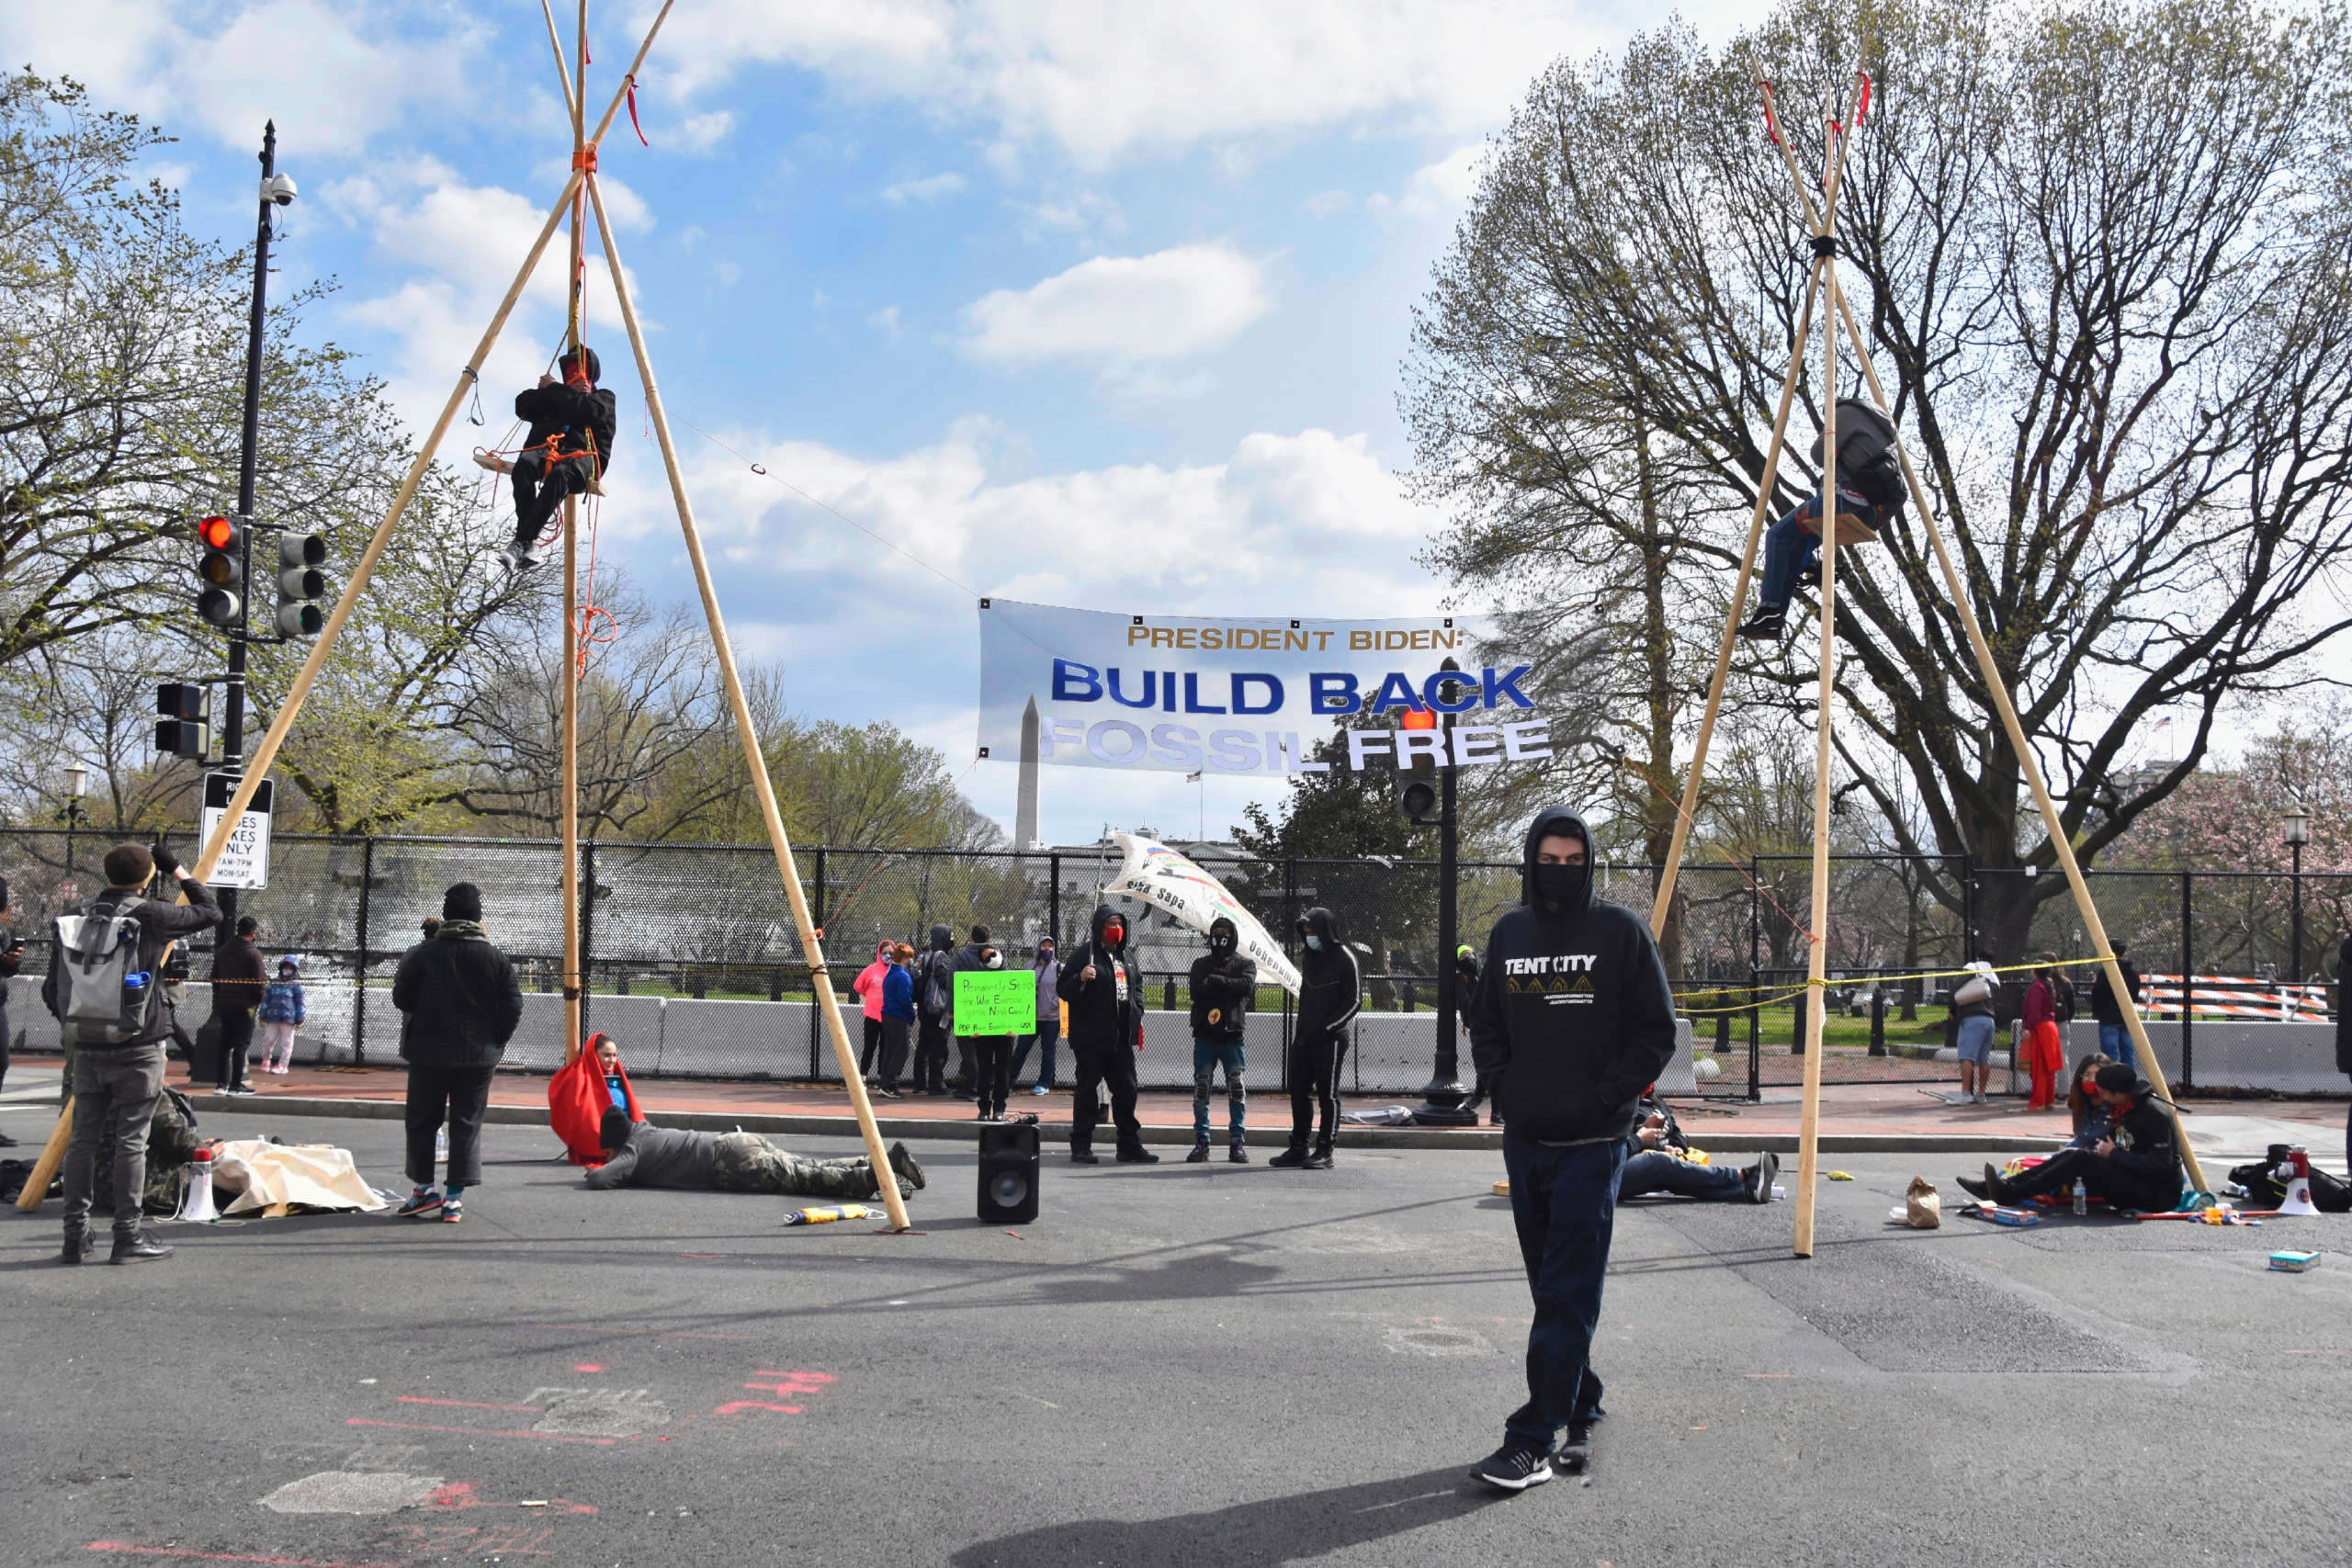 Indigenous youth and organizers urge Biden to “Build Back Fossil Free” in Washington, D.C., by ending the Dakota Access and Line 3 pipelines on April 1, 2021.